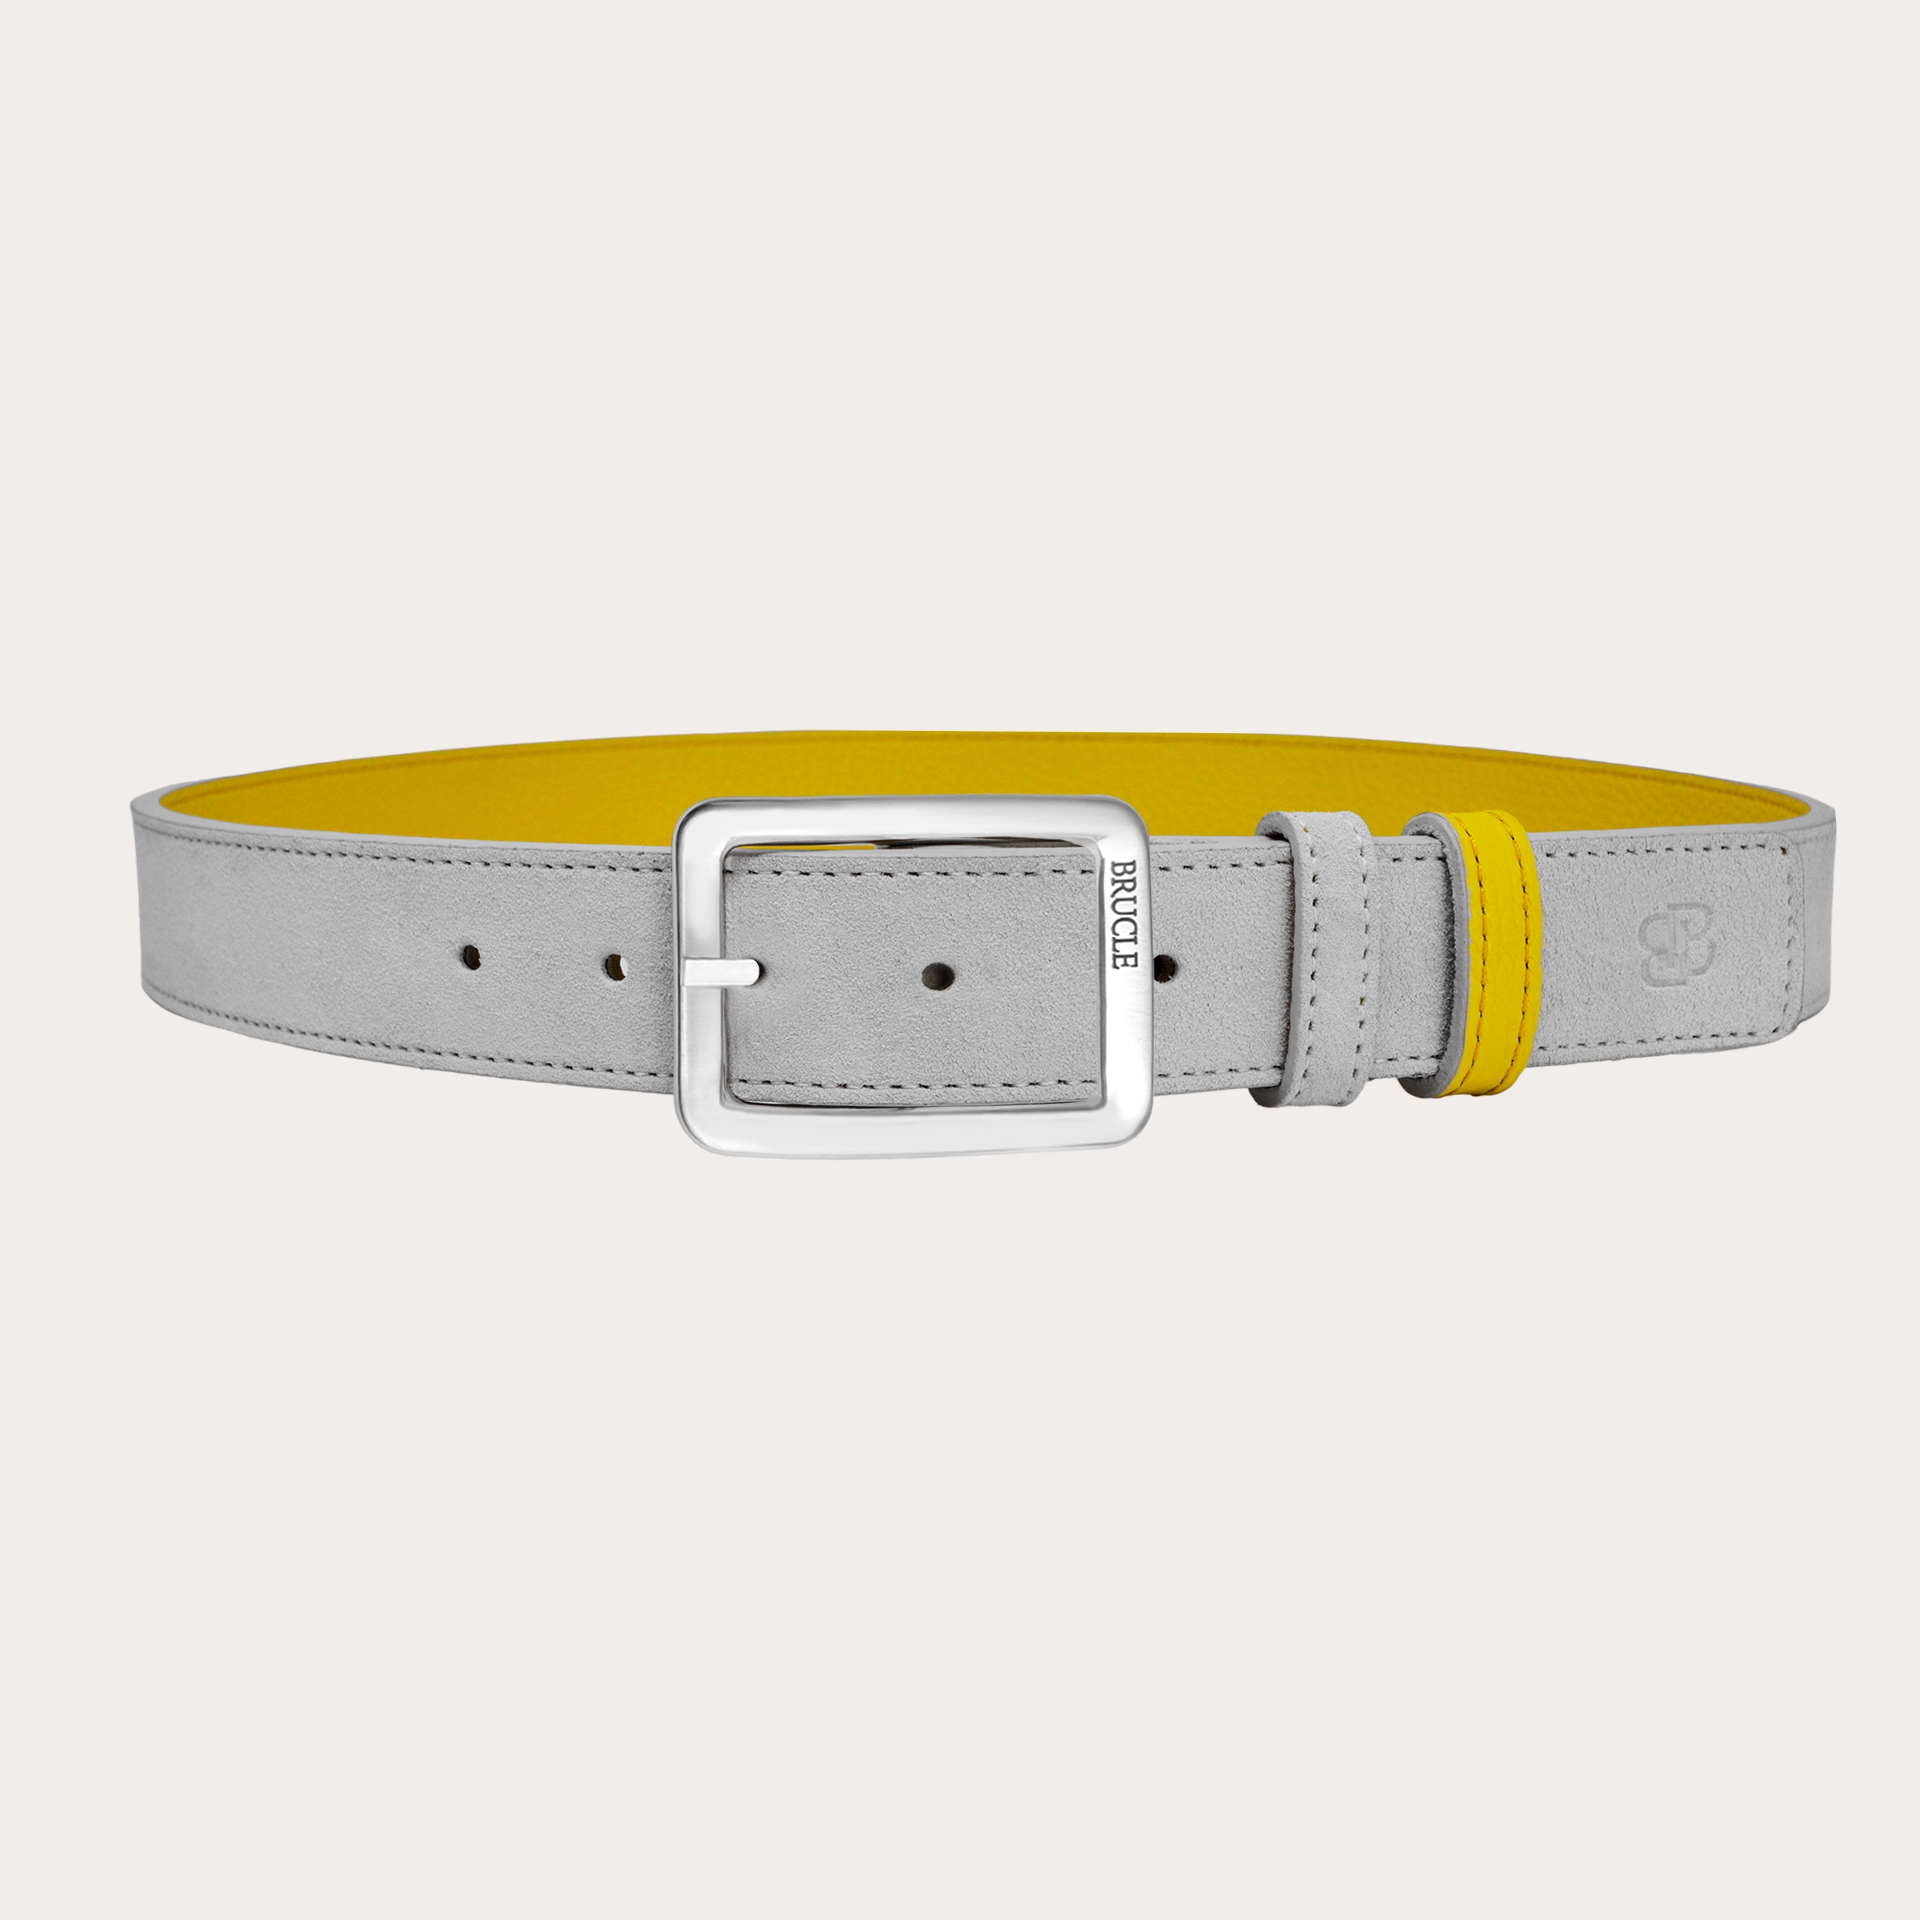 Reversible belt in ash grey suede and yellow tumbled leather